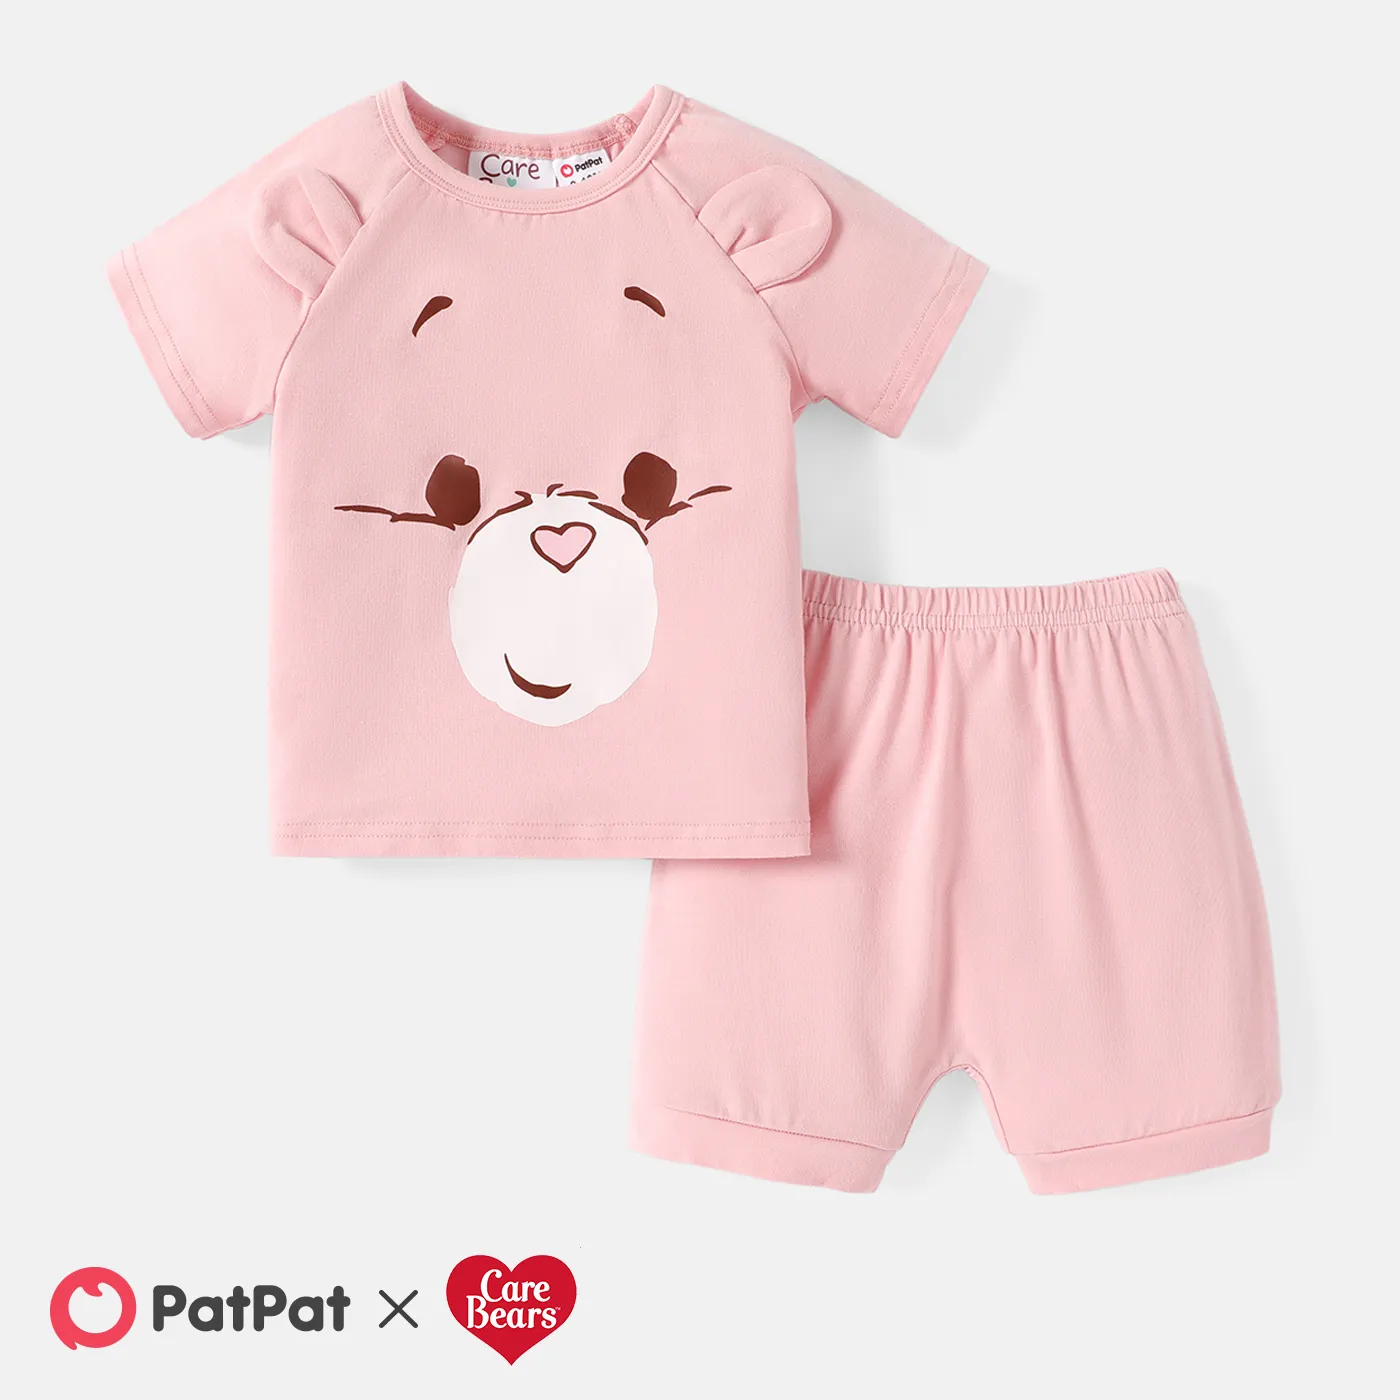 

Care Bears 2pcs Baby Boy/Girl Cotton Short-sleeve 3D Ears Detail Graphic Tee and Shorts Set